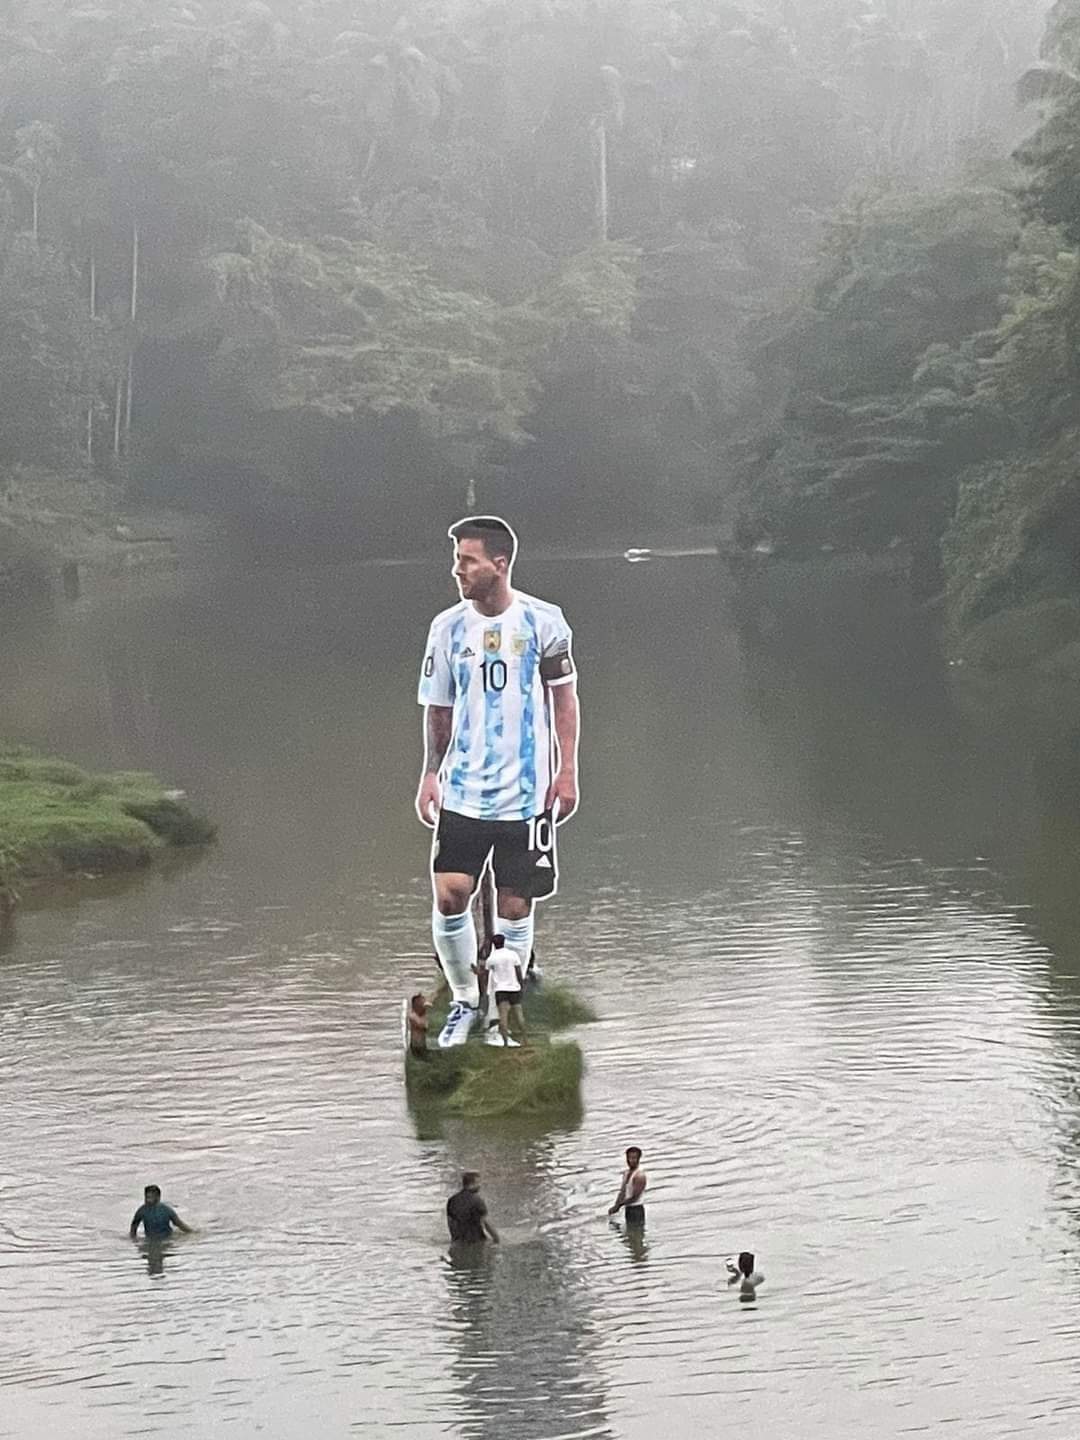 FIFA World Cup: Messi MADNESS engulfs India, Argentine fans ERECT 30 ft Lionel Messi Cut out in middle of River - Watch Video